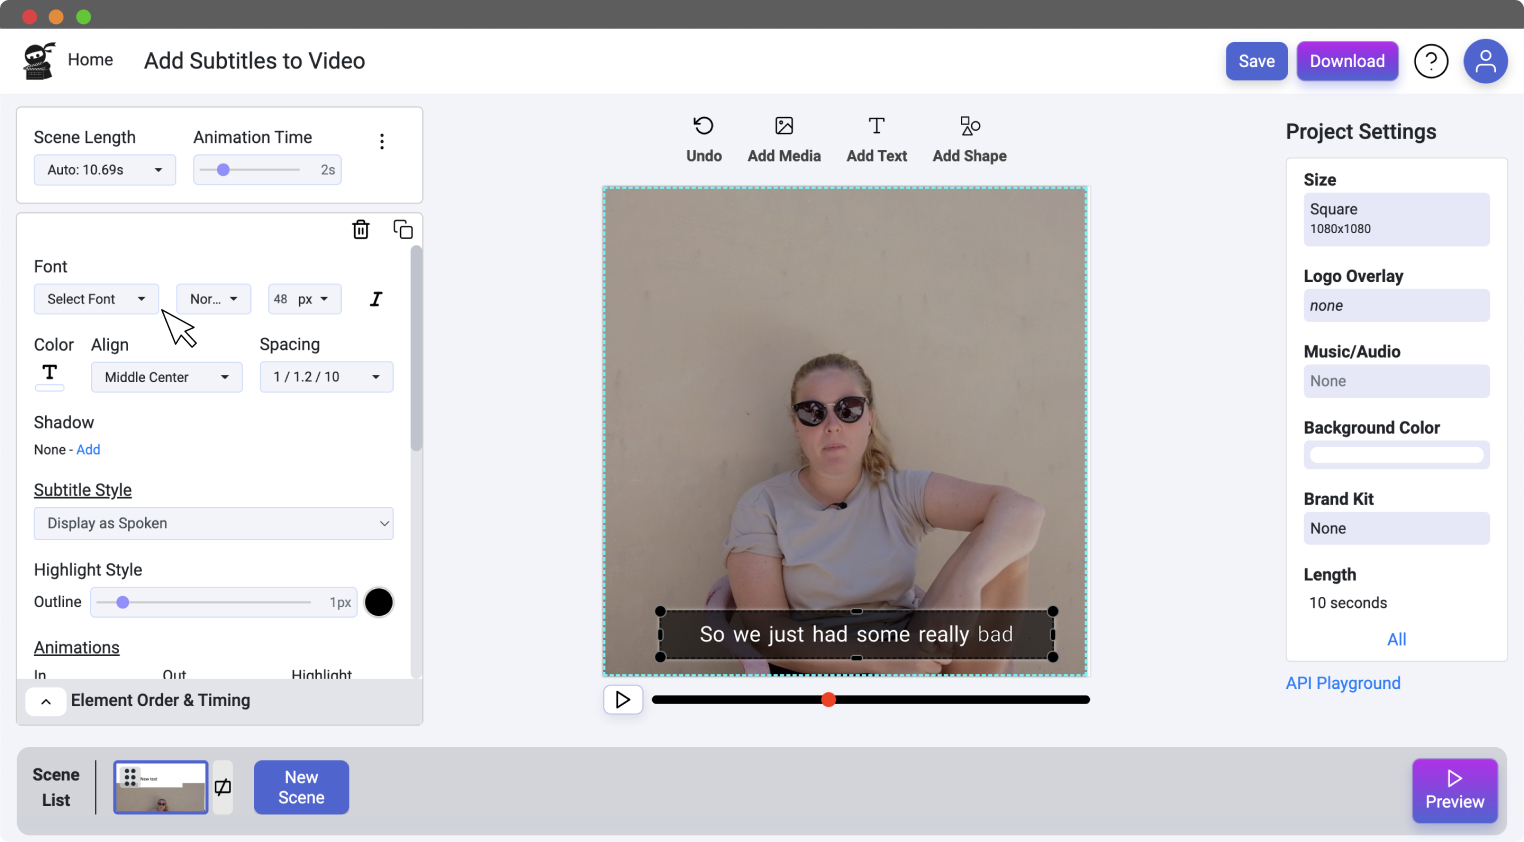 Add subtitles to video online - Easy online video editing